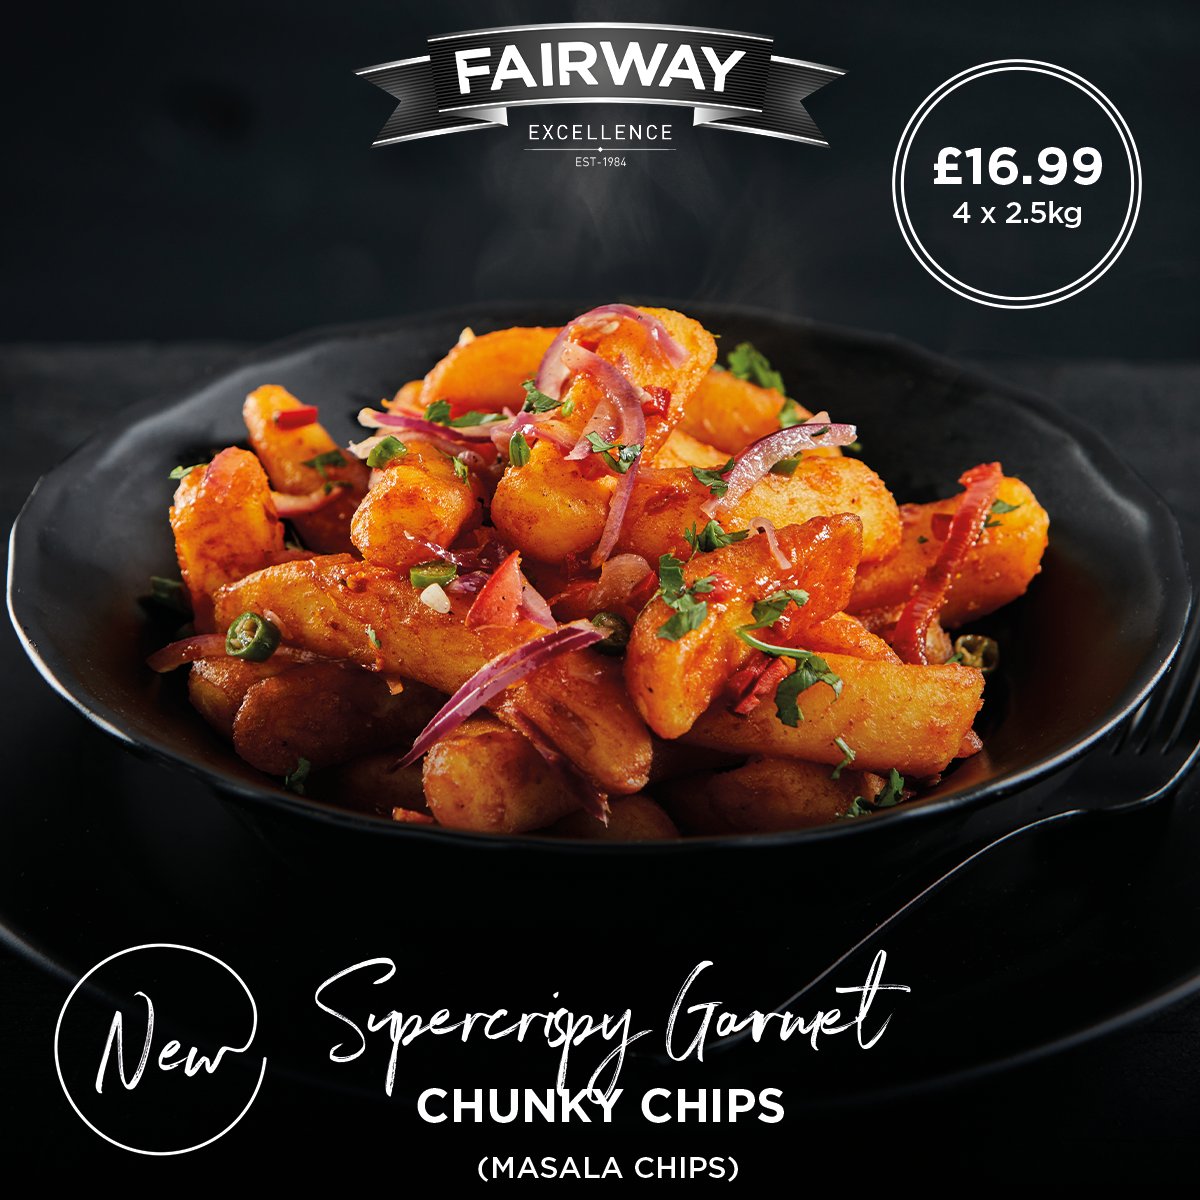 Try our NEW Fairway Excellence Supercrispy Gourmet Chunky Chips in a tantalising Masala Chips dish! 🍟🔥

Click here for full recipe 👉 ow.ly/YPl750RFpR4

#FairwayExcellence #Foodservice #Hospitality #Catering #Chef